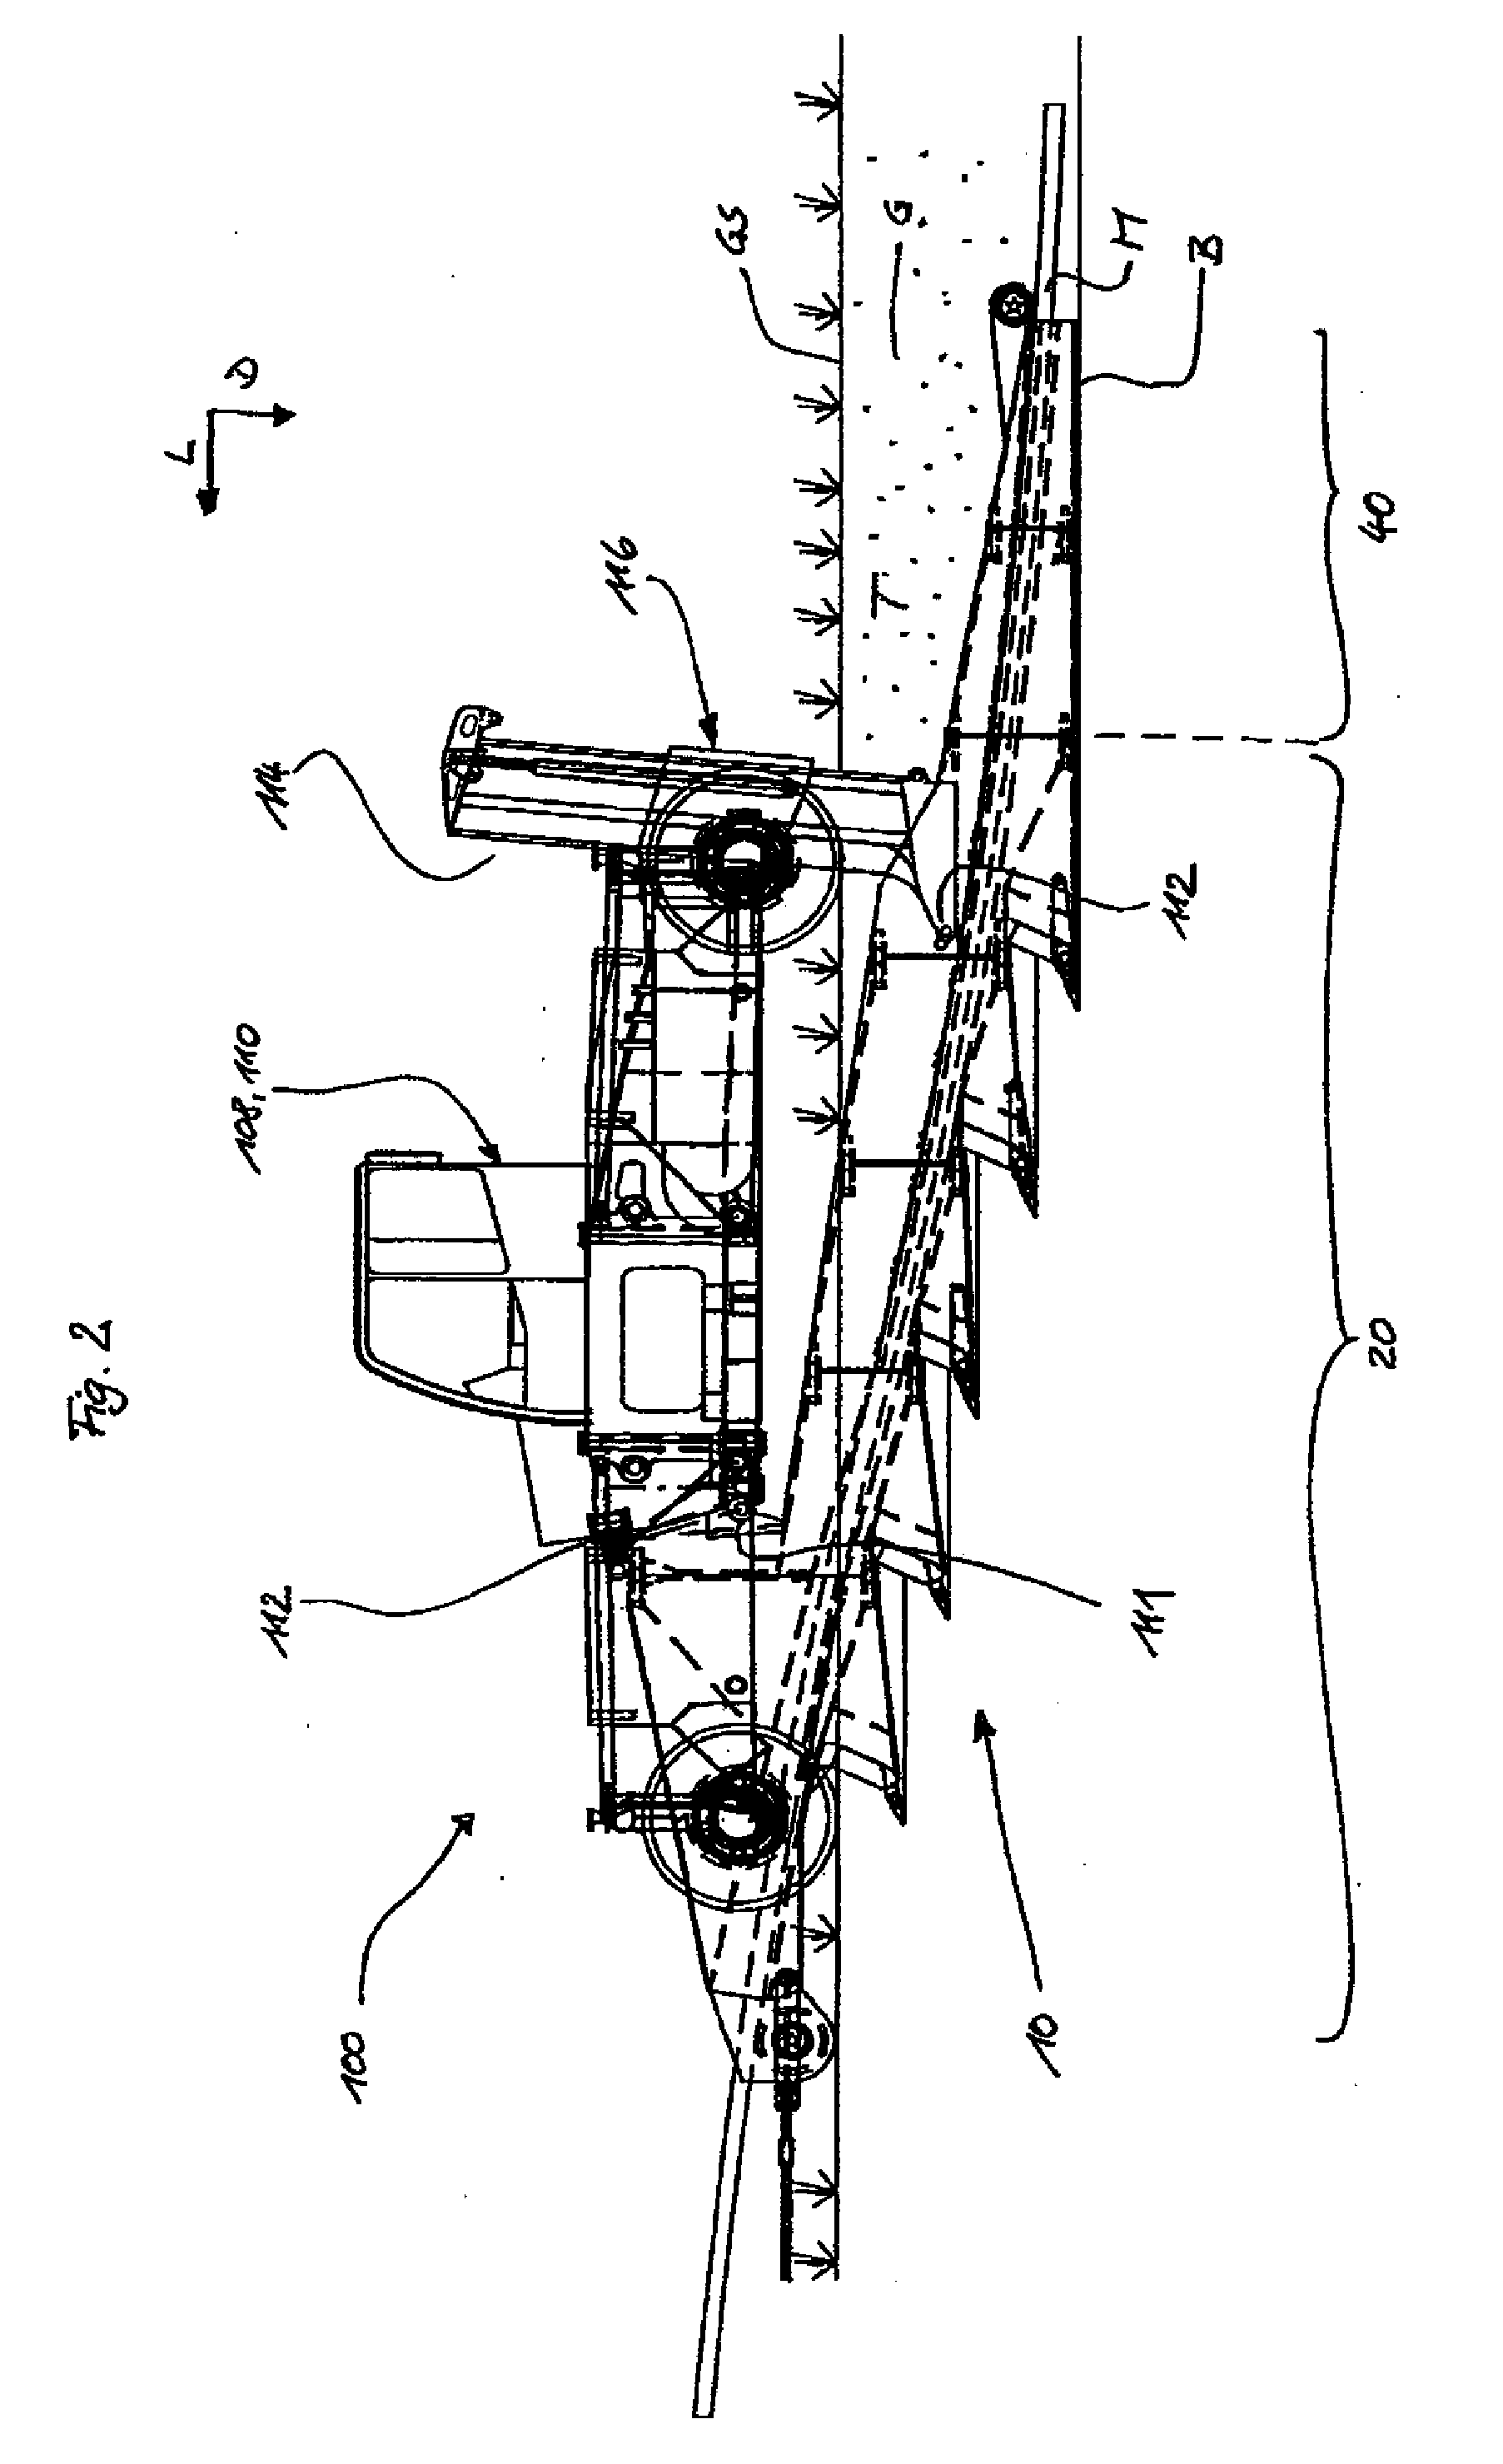 Strand-like material laying device for cutting the ground and inserting strand-like material into the ground